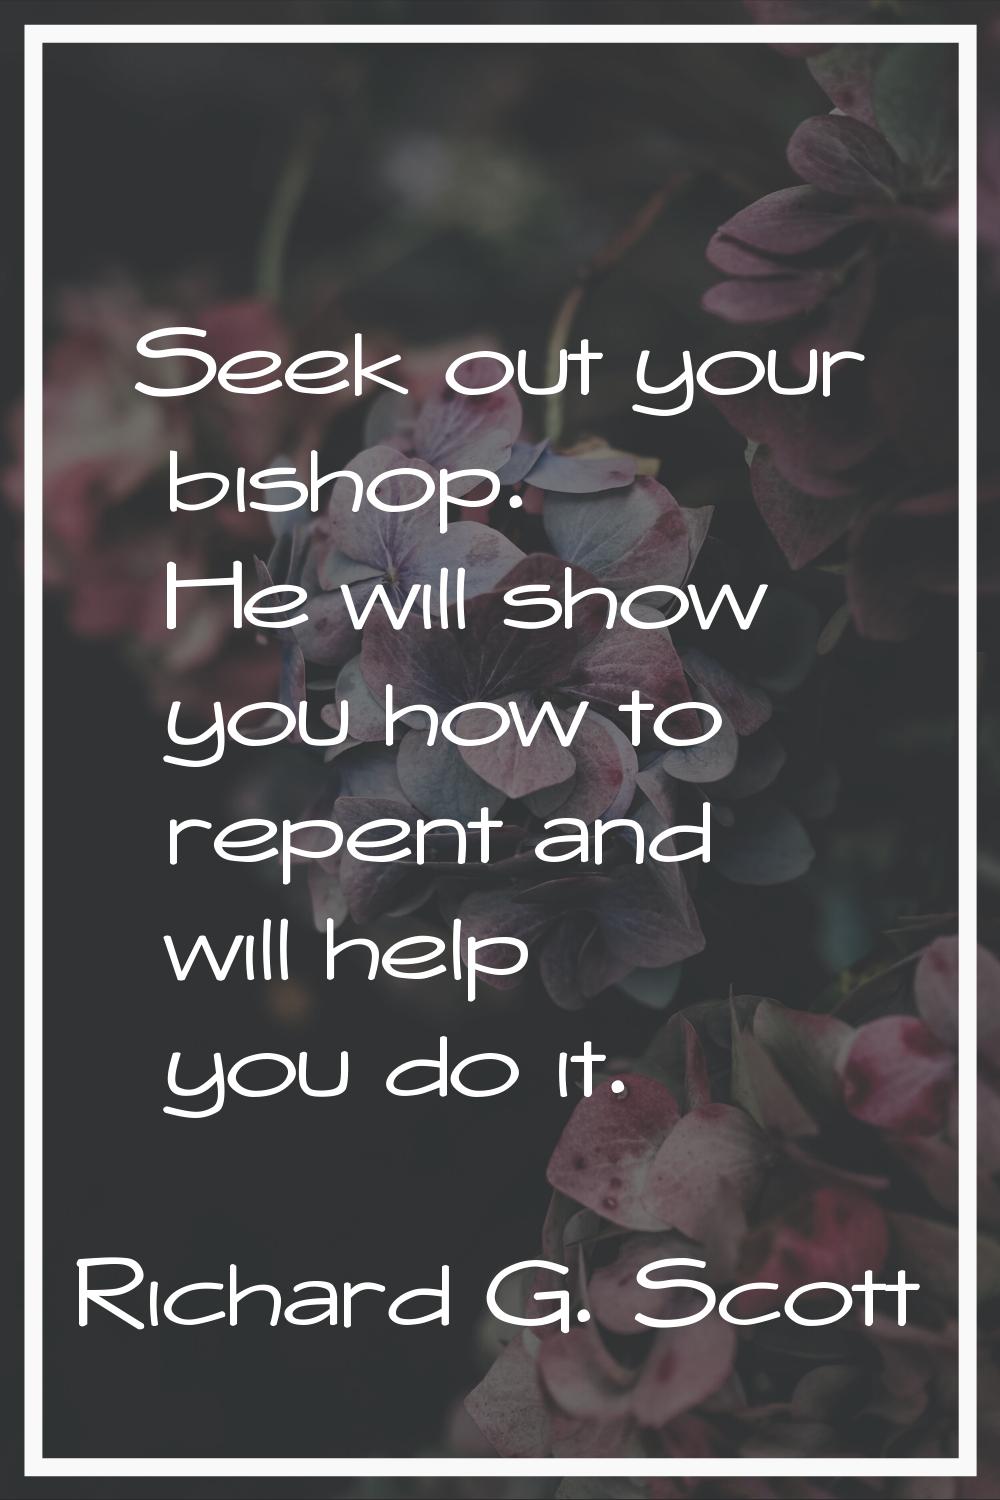 Seek out your bishop. He will show you how to repent and will help you do it.